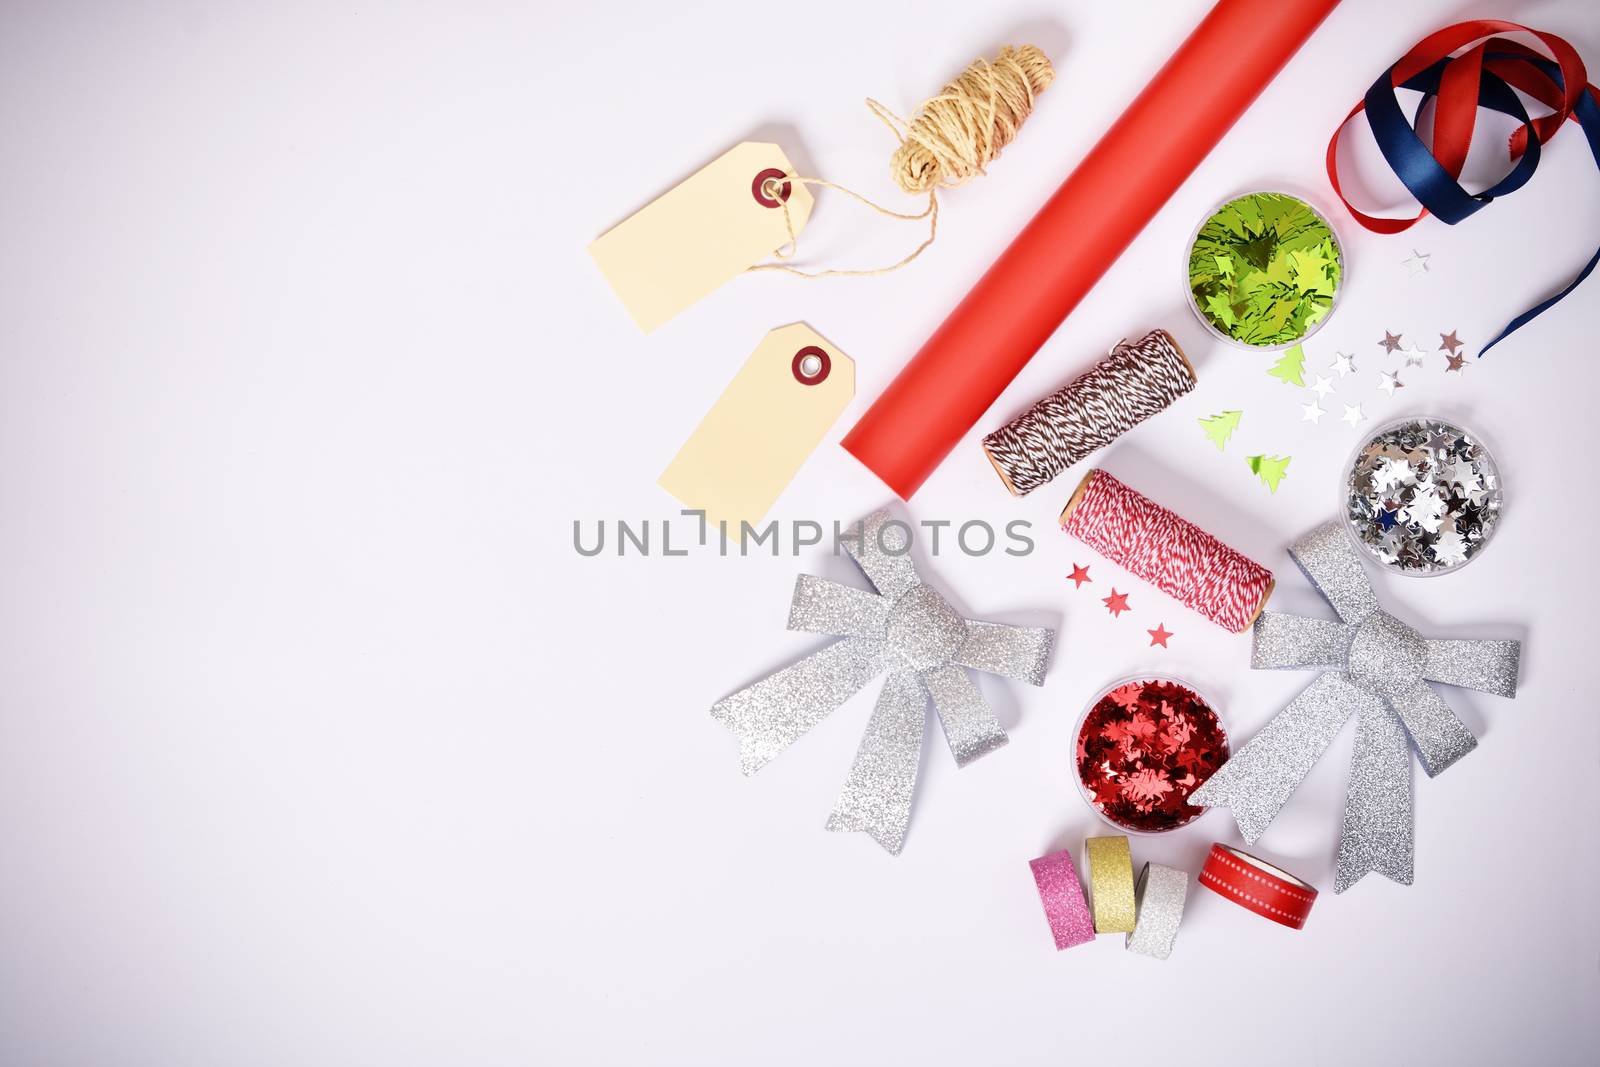 Gift wrapping items and Christmas decorations by Mendelex